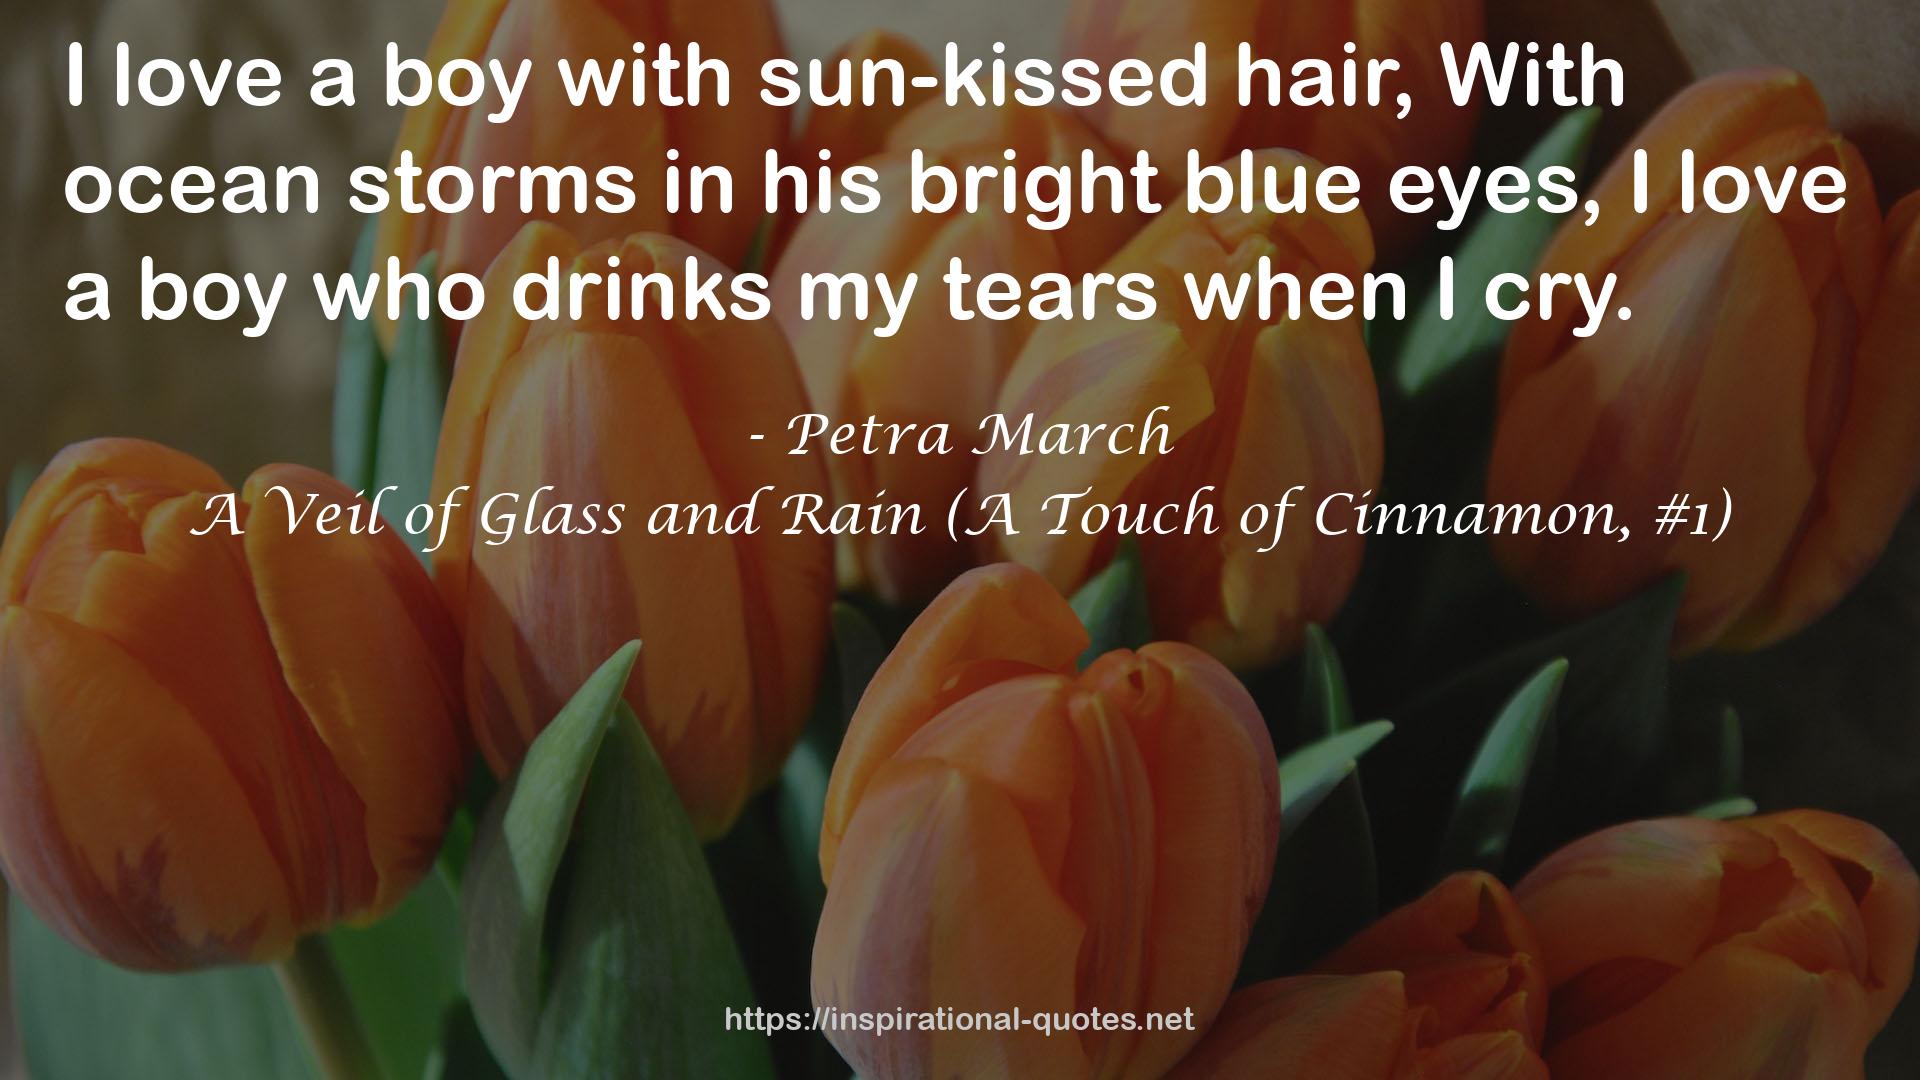 A Veil of Glass and Rain (A Touch of Cinnamon, #1) QUOTES